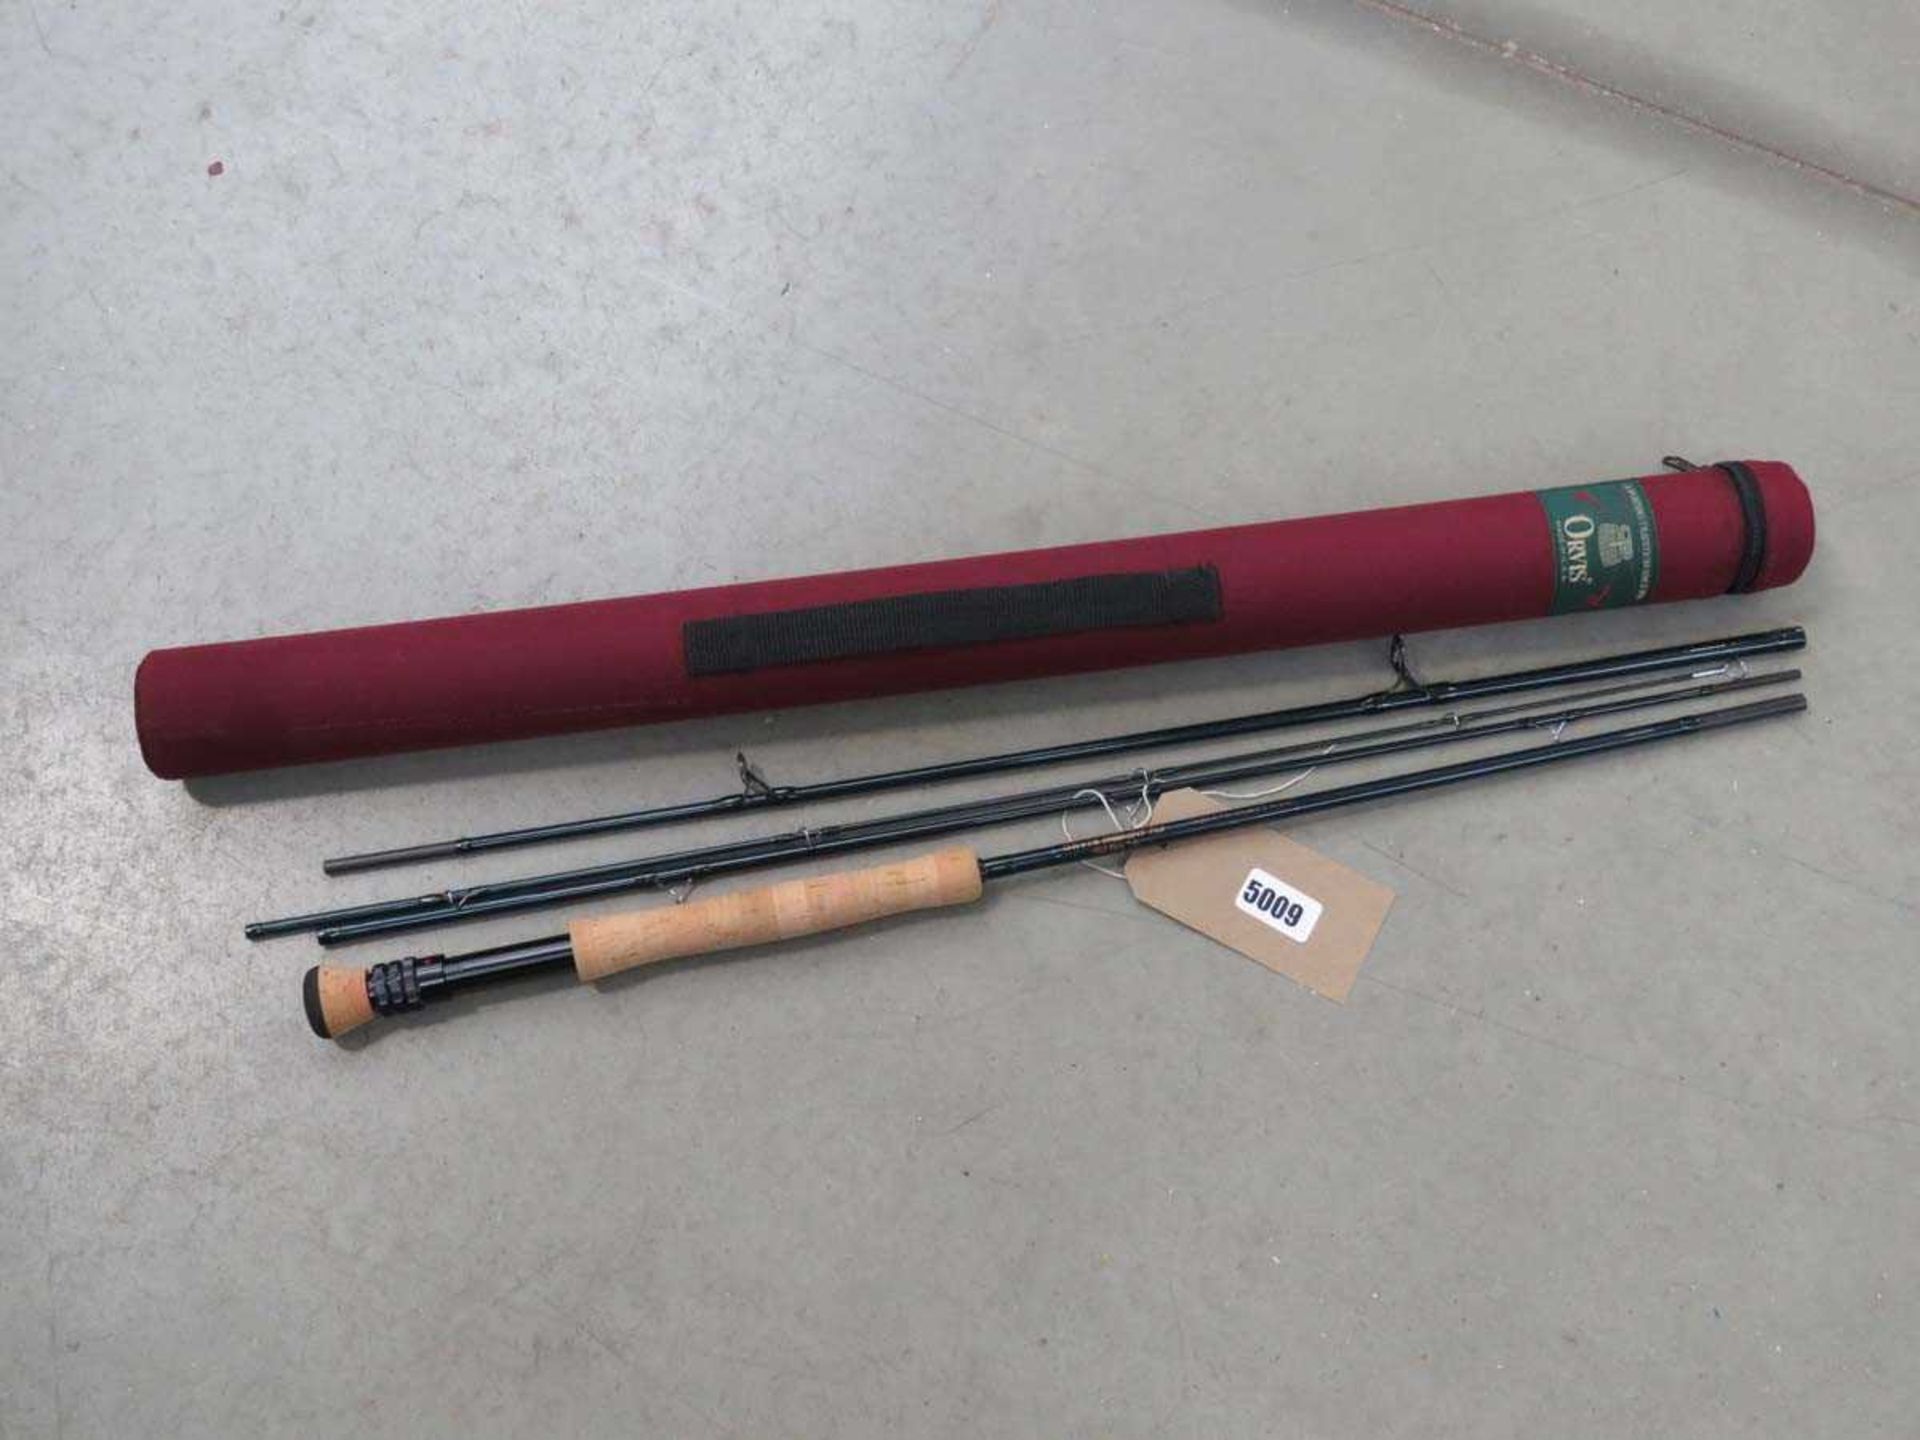 Orvis Trident 12 weight 4 piece fly rod